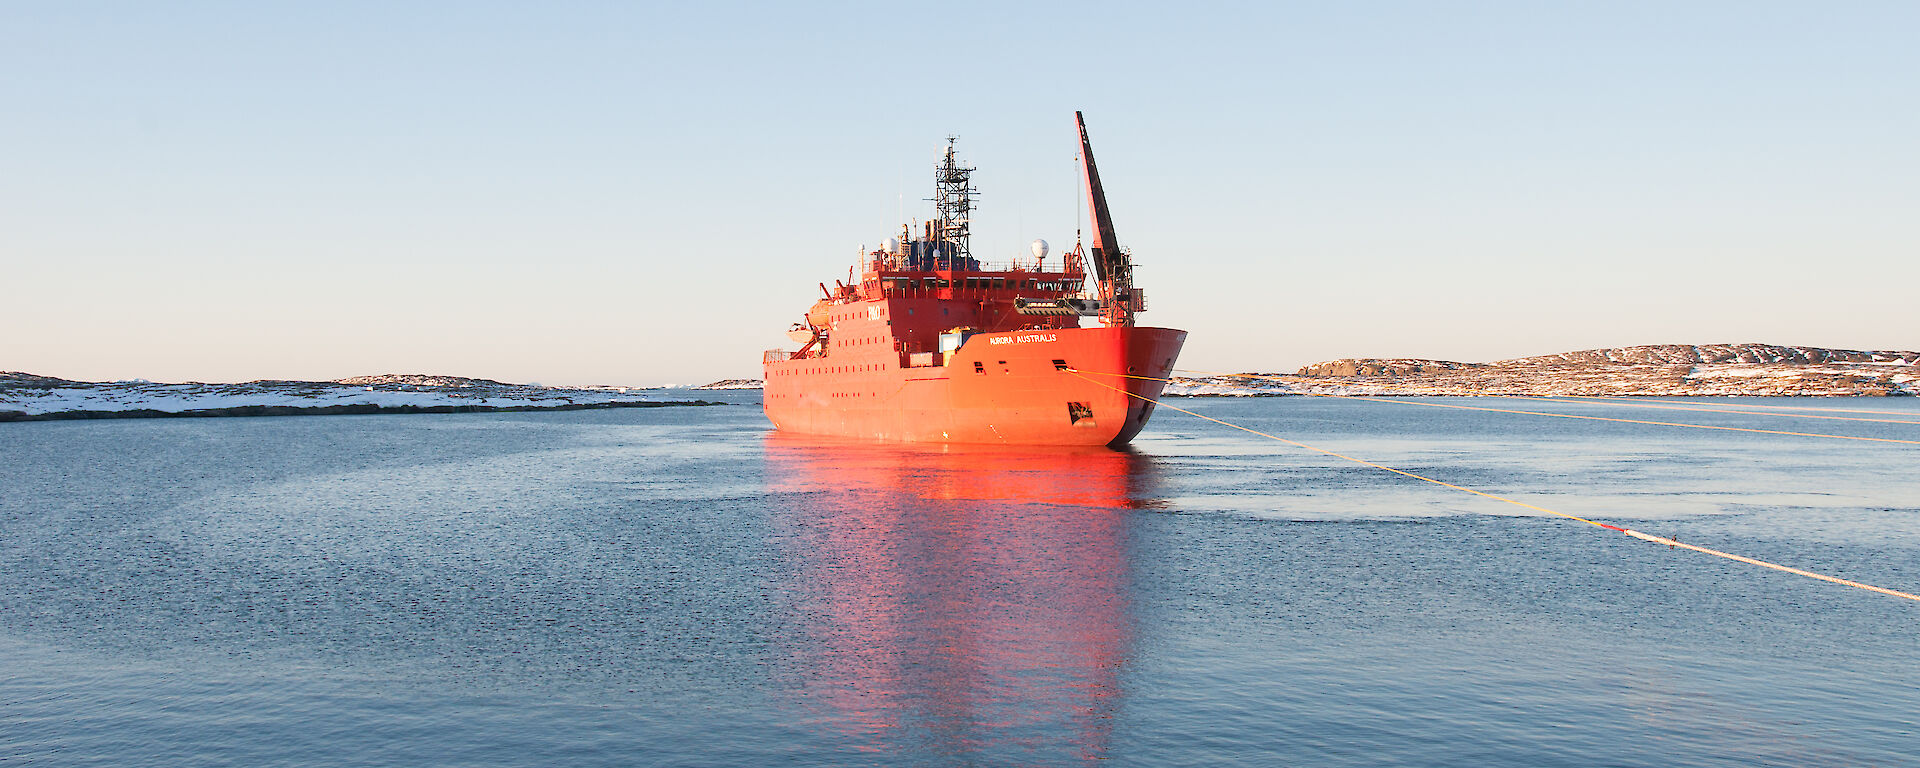 The Aurora Australis in the harbour at Mawson in calm waters.